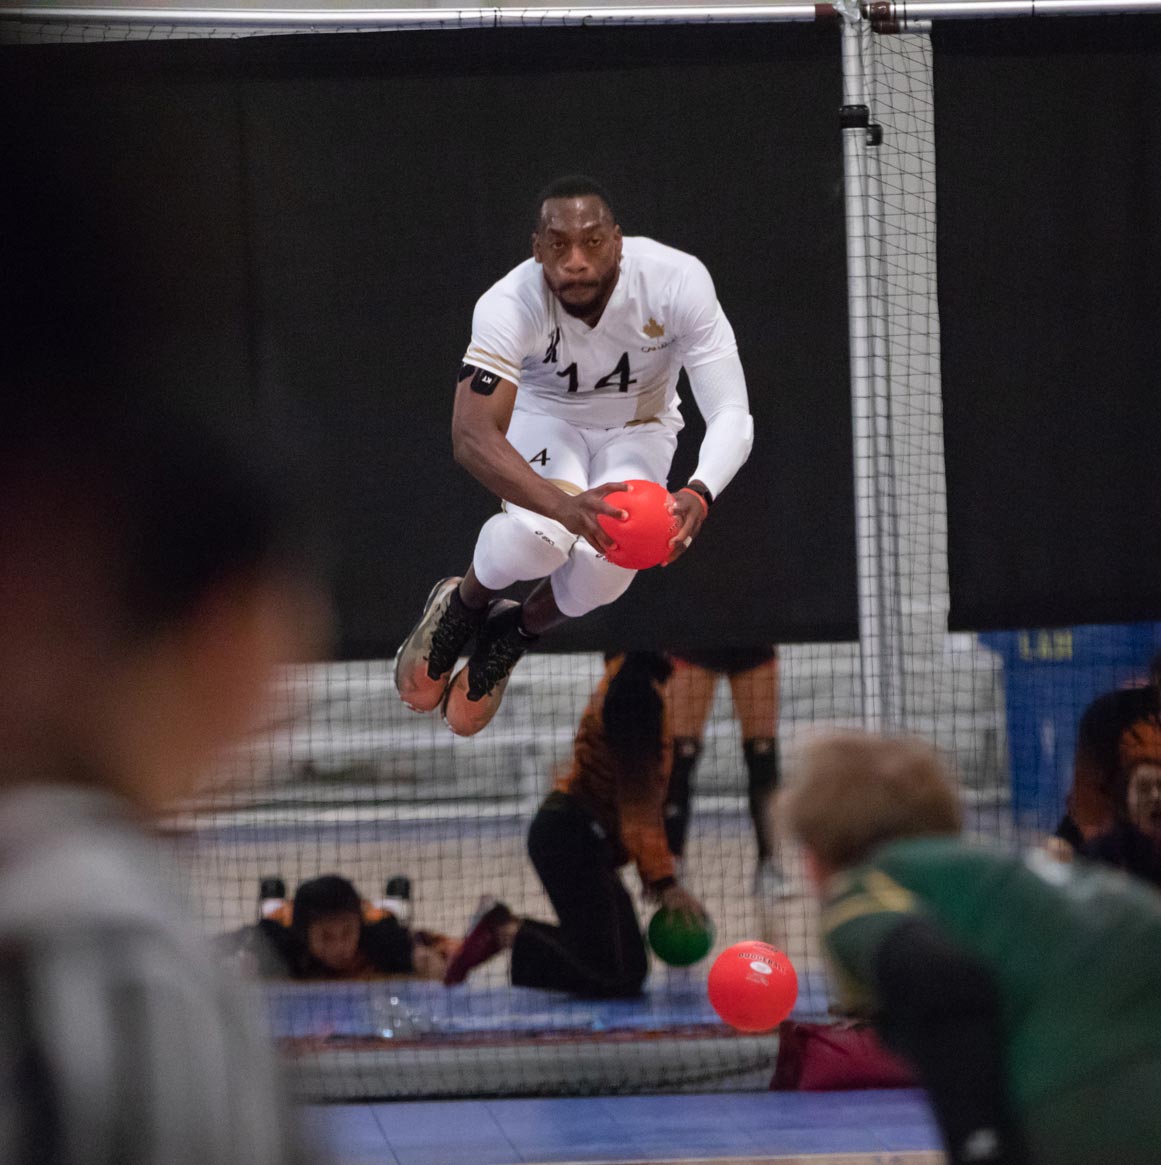 Trainer’s Perspective: Strategies to Prevent Lower Extremity Injuries Common in Dodgeball